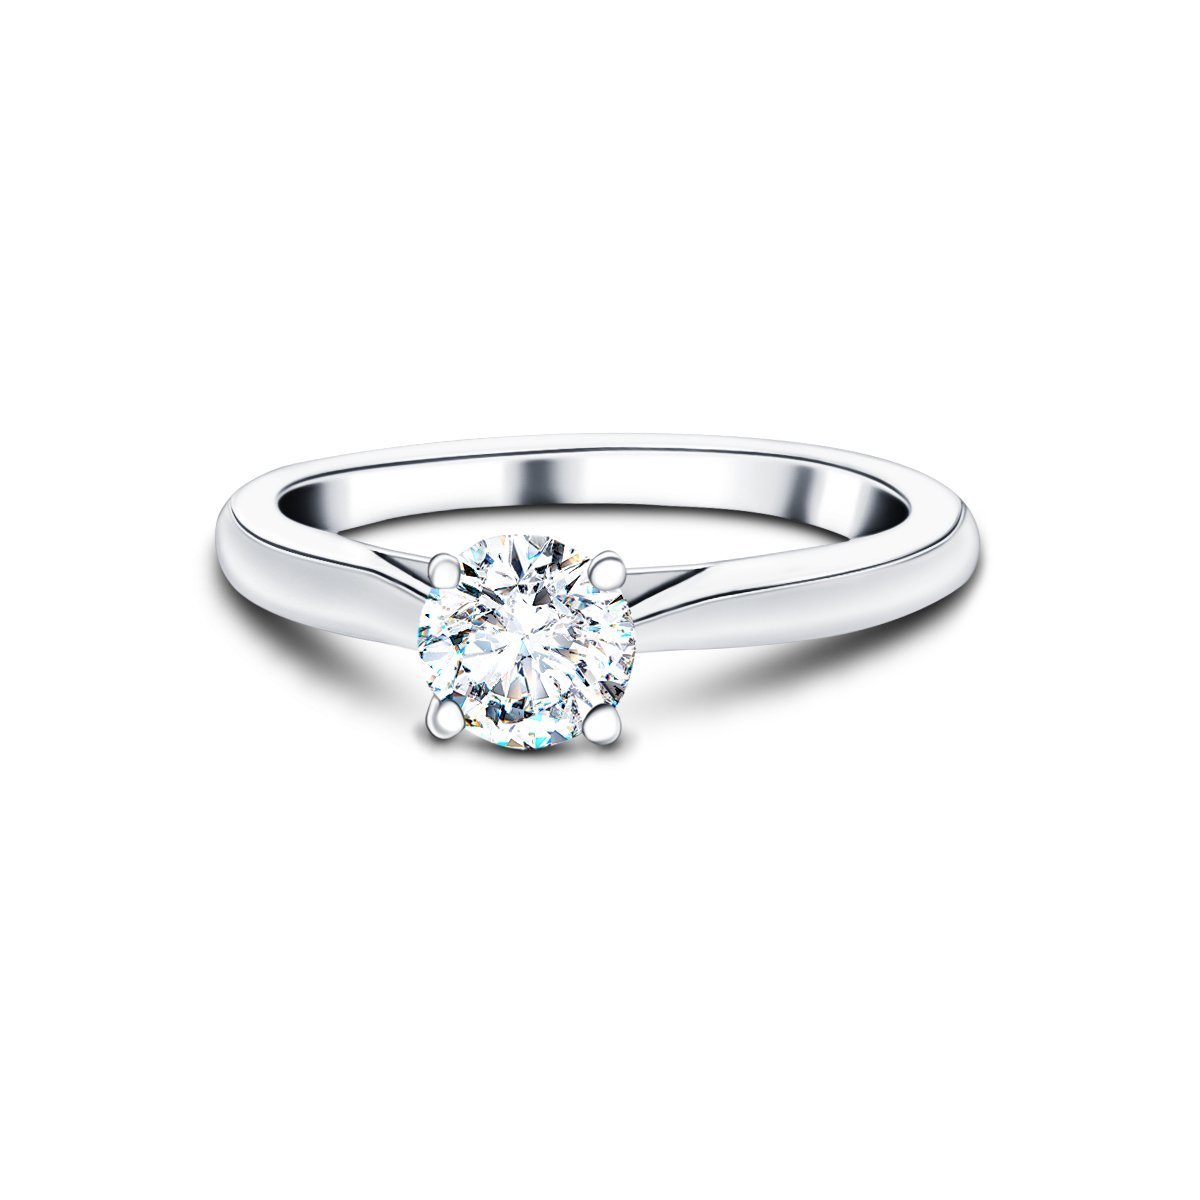 Certified Solitaire Diamond Engagement Ring 0.40ct H/SI Quality In Platinum - All Diamond